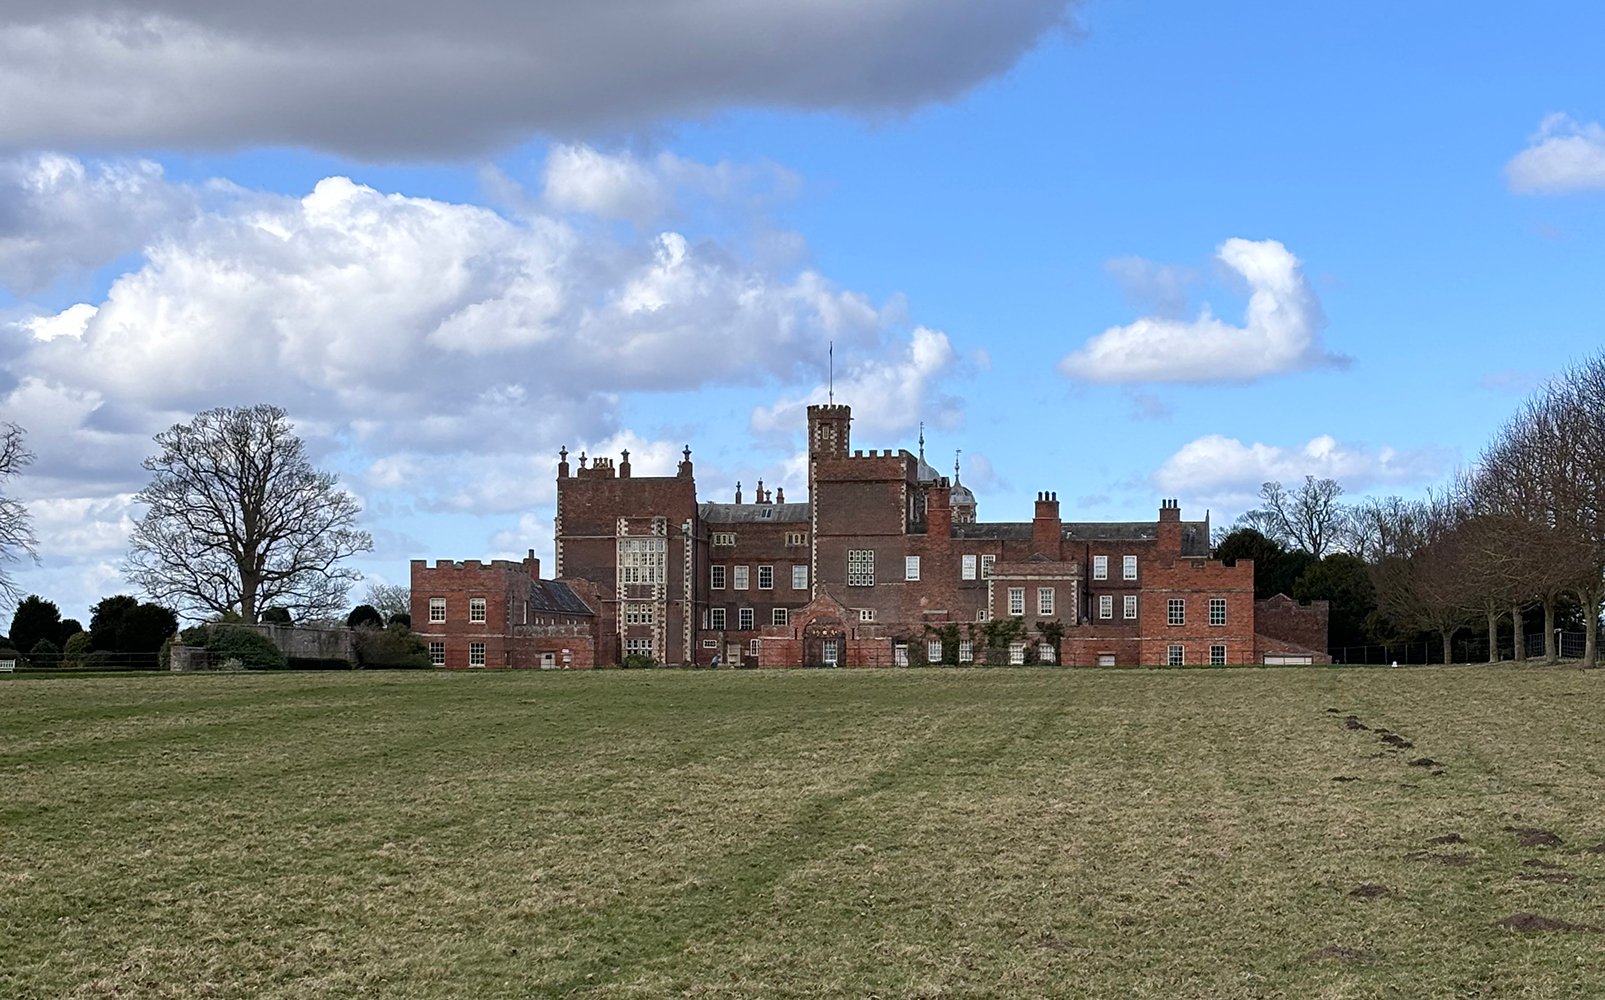 Image name burton constable hall red bricks blue sky and clouds east yorkshire the 8 image from the post A look at the history of Burton Constable Hall, with Dr Emma Wells in Yorkshire.com.